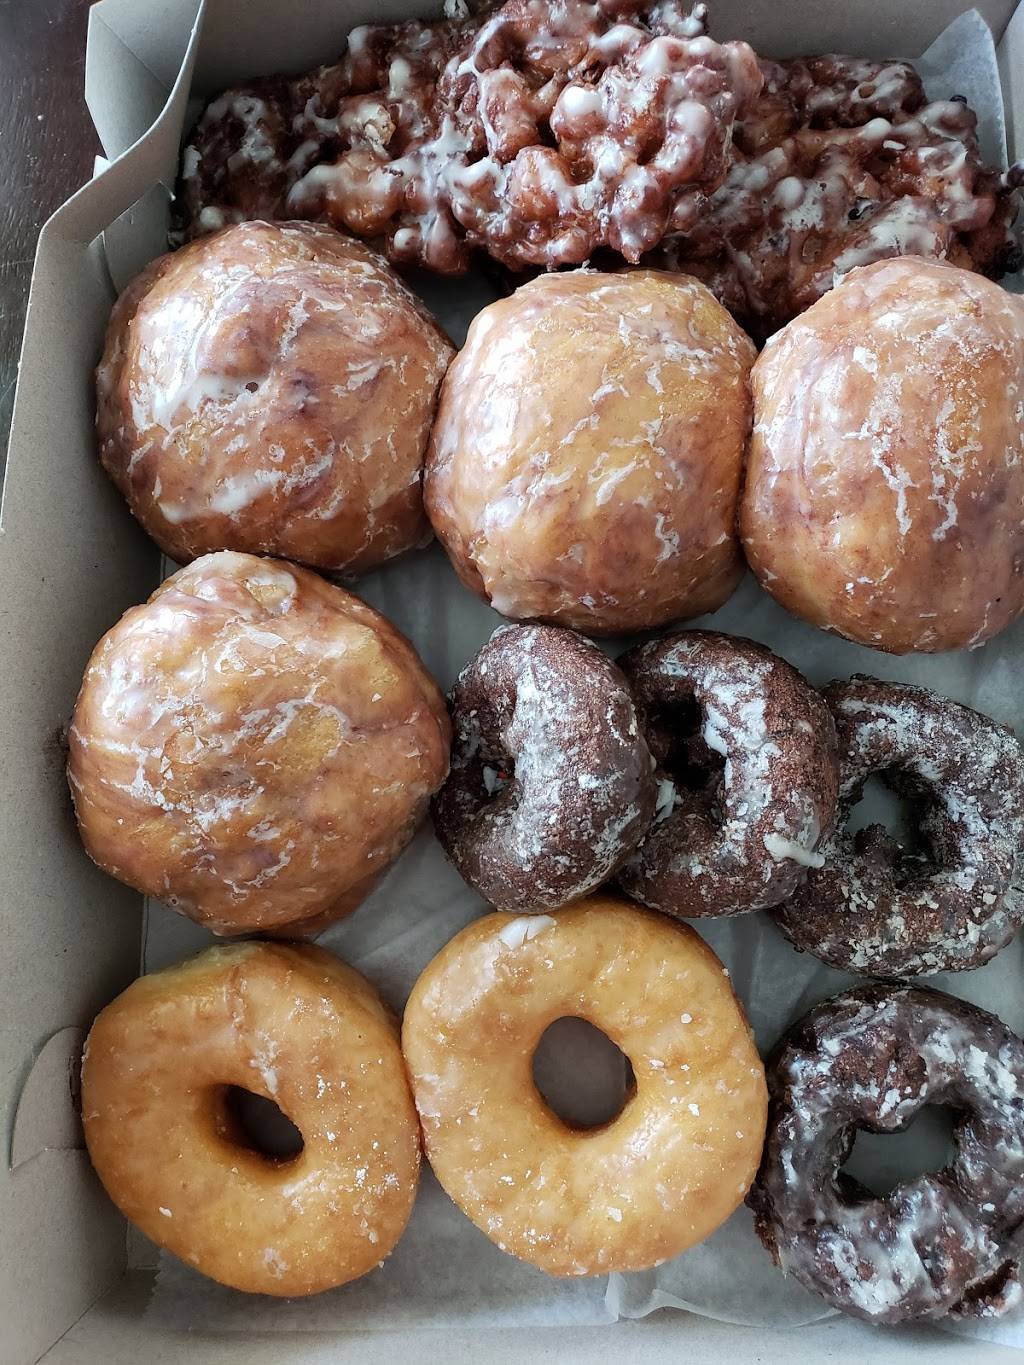 The Donut Stop | 1101 Lemay Ferry Rd, St. Louis, MO 63125 | Phone: (314) 631-3333